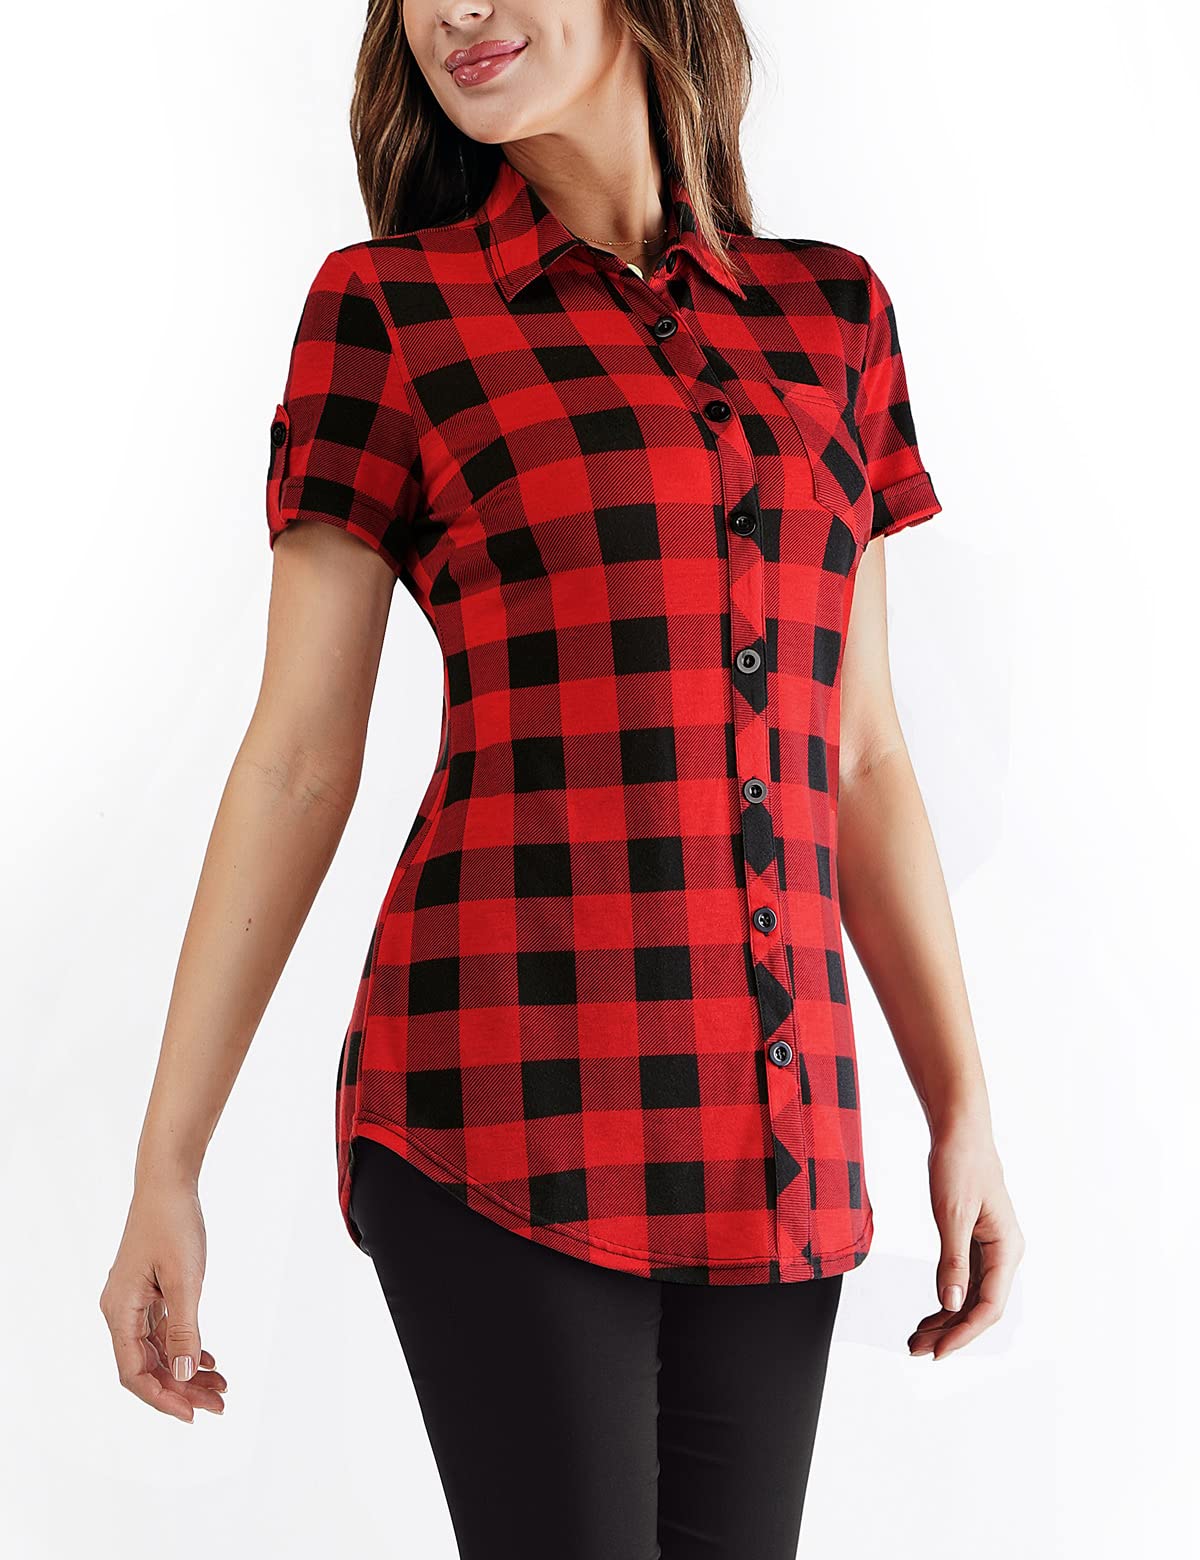 DJT Roll Up Long Sleeve Short Sleeve Red Plaid Women’s Collared Button Down Plaid Shirt